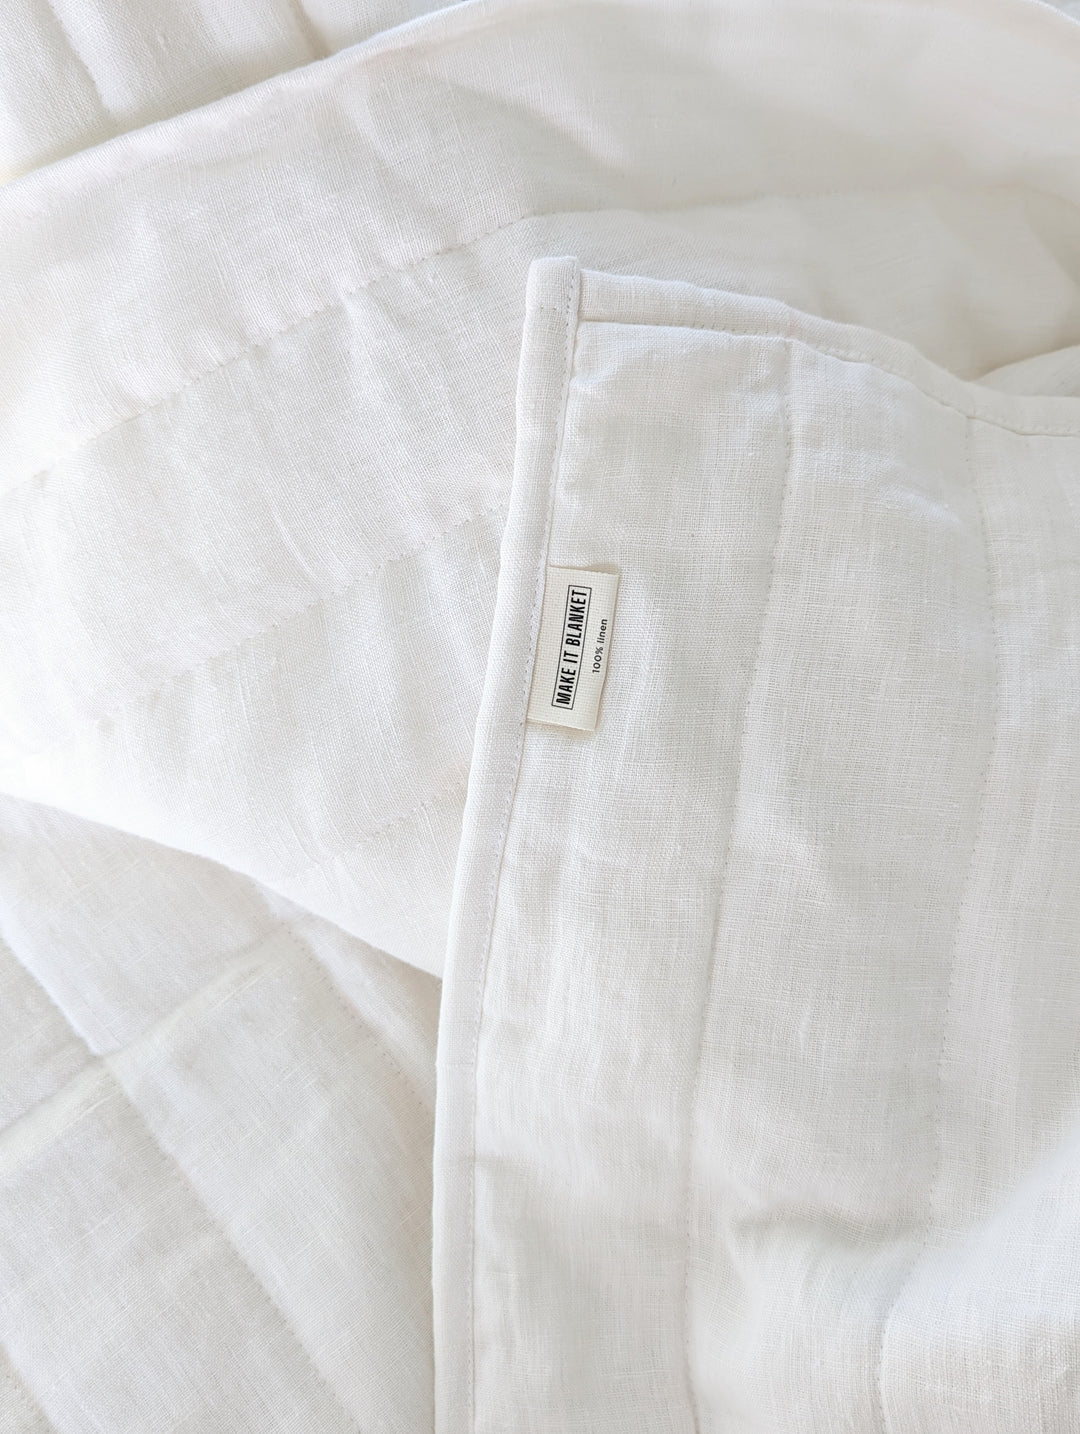 Luxurious 100% French Linen King Quilted Bed Blanket for Bed Luxurious 100% French Linen King Quilted Bed Blanket for BedFind your perfect linen bedding online Linen bedding sale for a limited time Explore our collection of linen bedding Get cozy with our linen bedding selection Shop now for luxurious linen bedding Upgrade your bedroom with linen bedding Affordable #color_warm-white